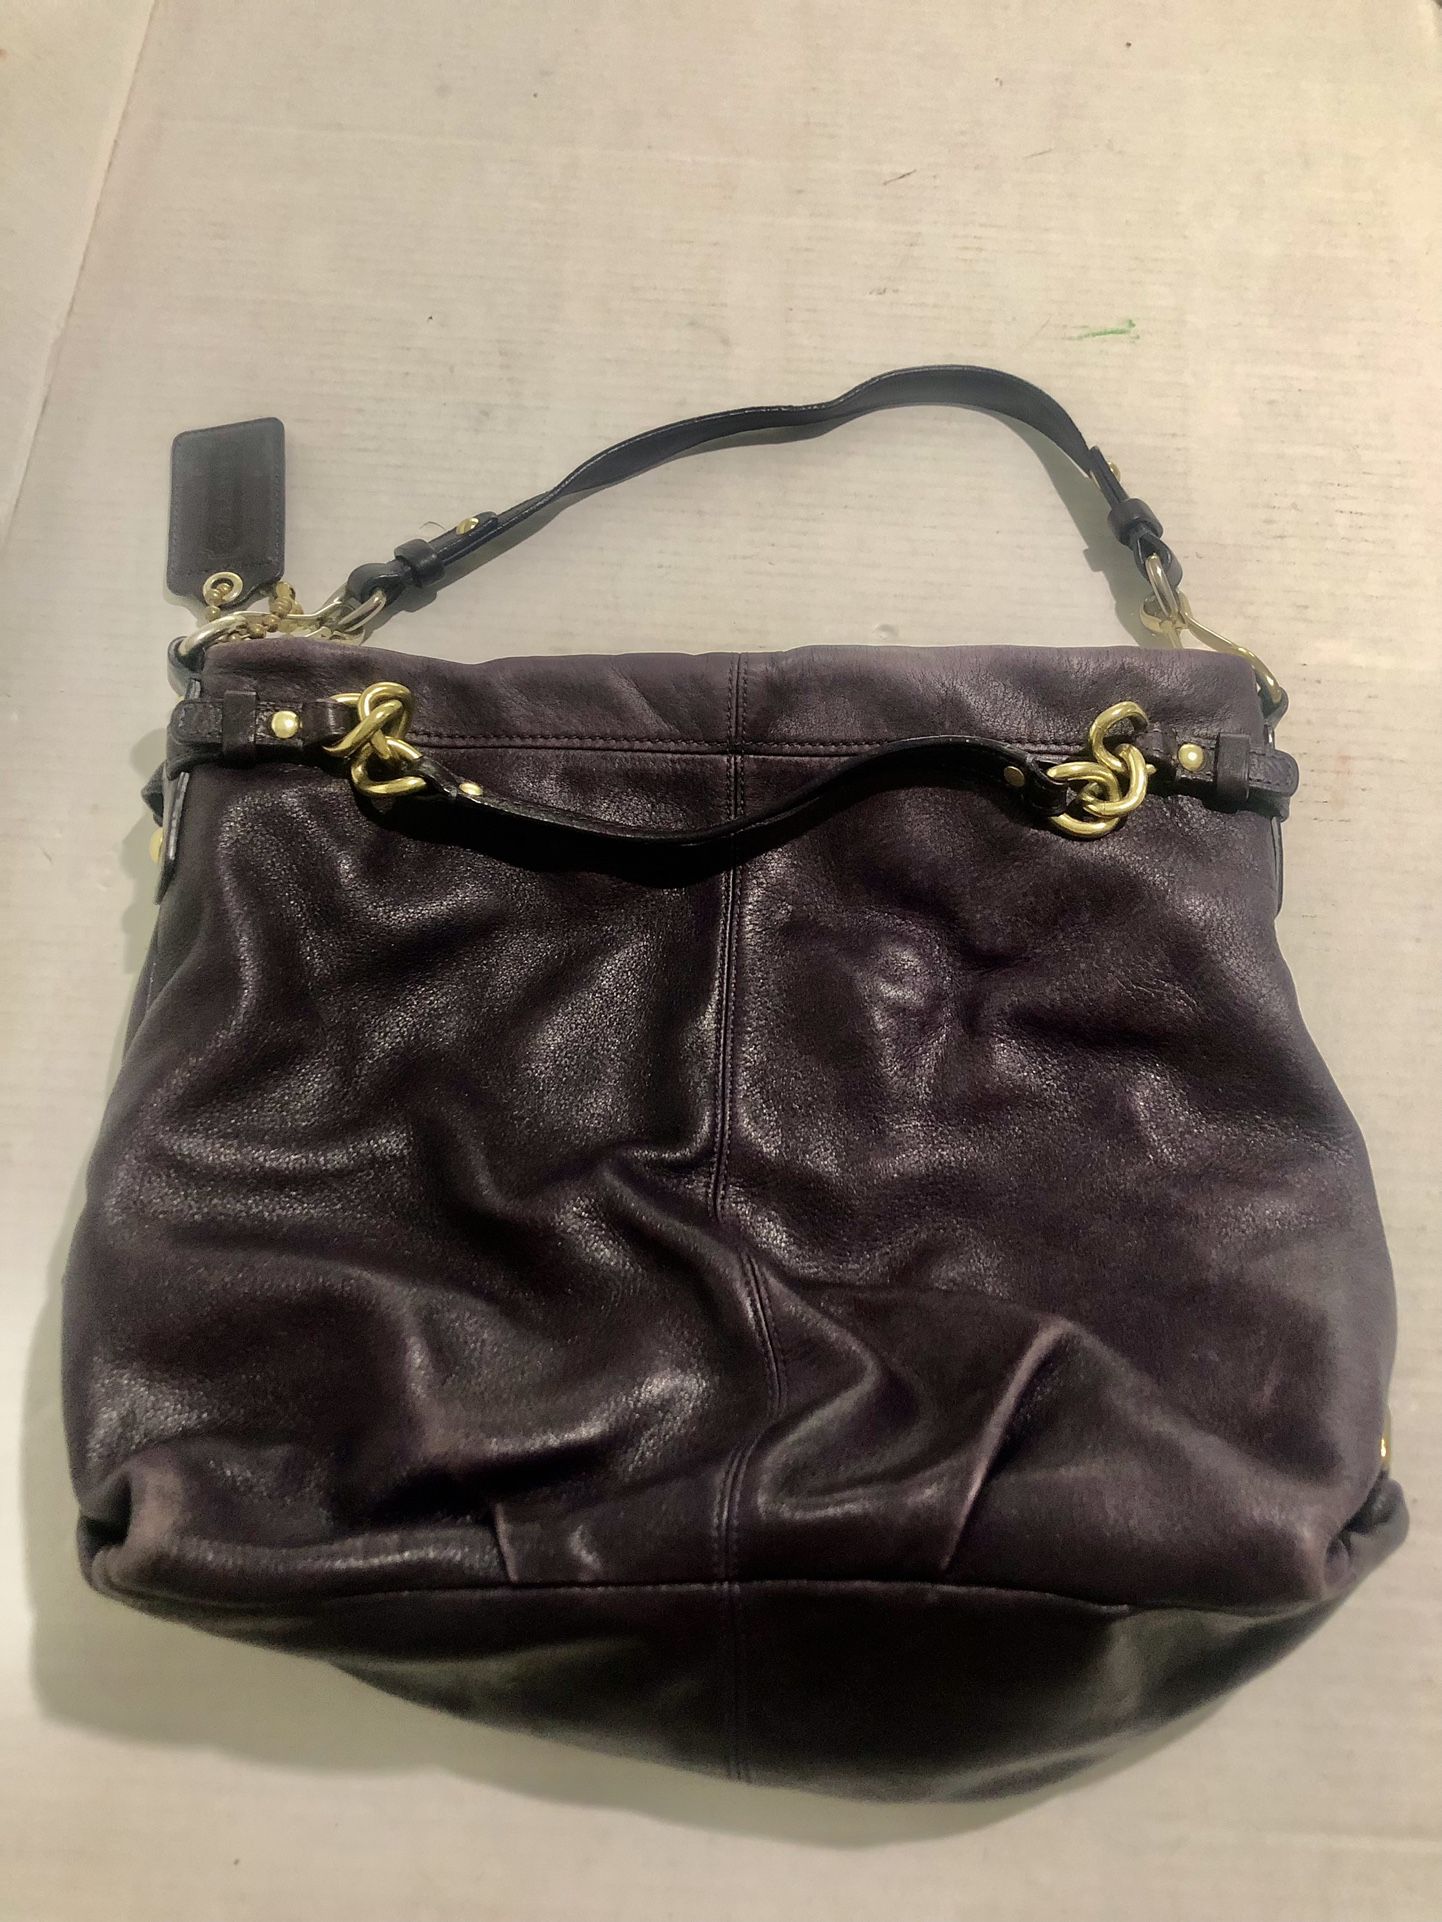 Stunning Coach Leather Plum Hobo Handbag  Absolutely Stunning  Inside is in excellent Condition, Gently used corners but if you clean it with leather 